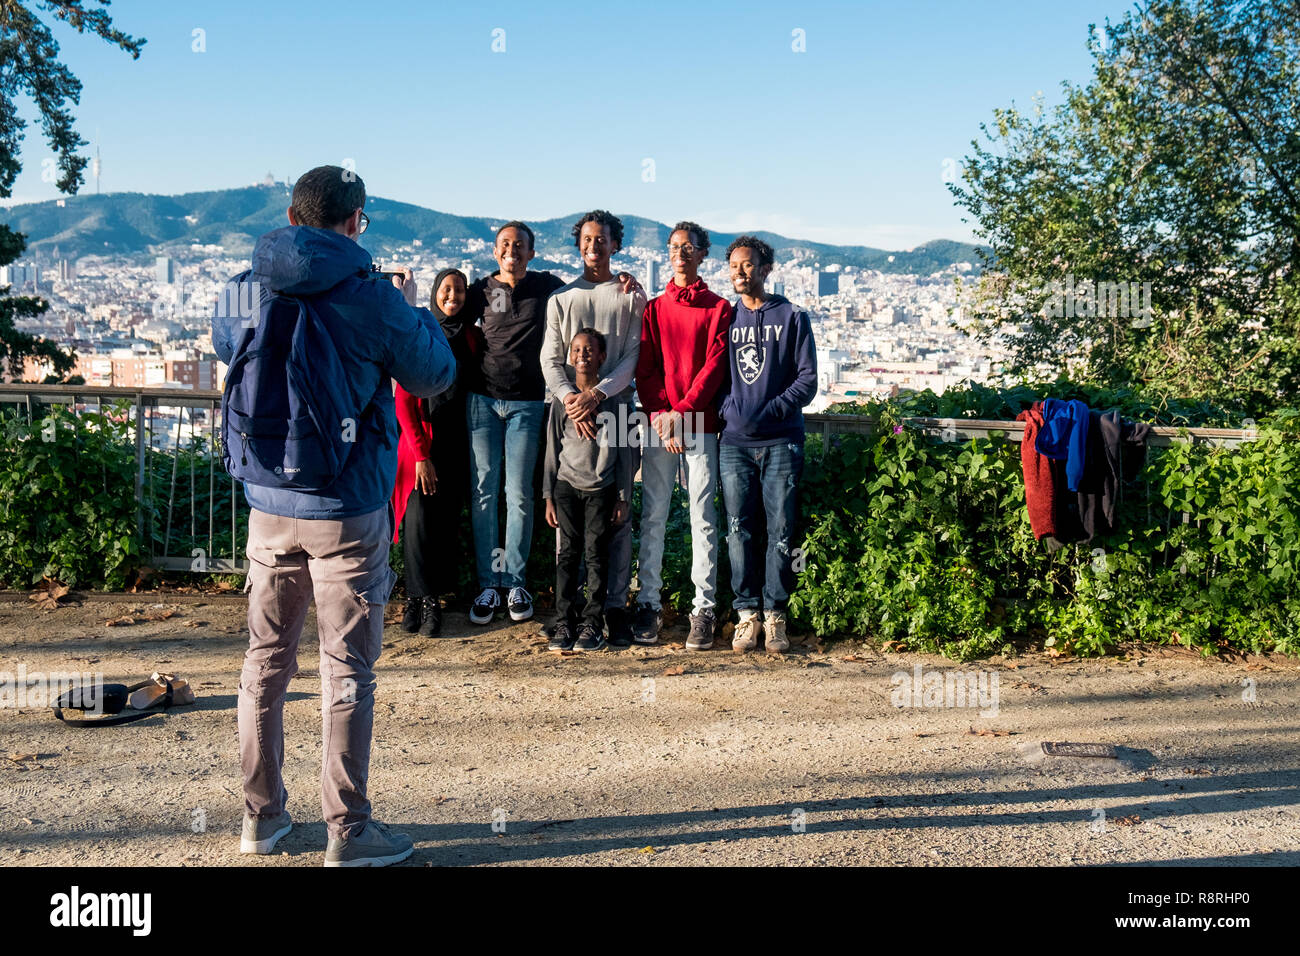 Barcelona, Spain - 24 november 2018: group of young smiling african american friends and family pose for a picture during holidays trip in europe Stock Photo